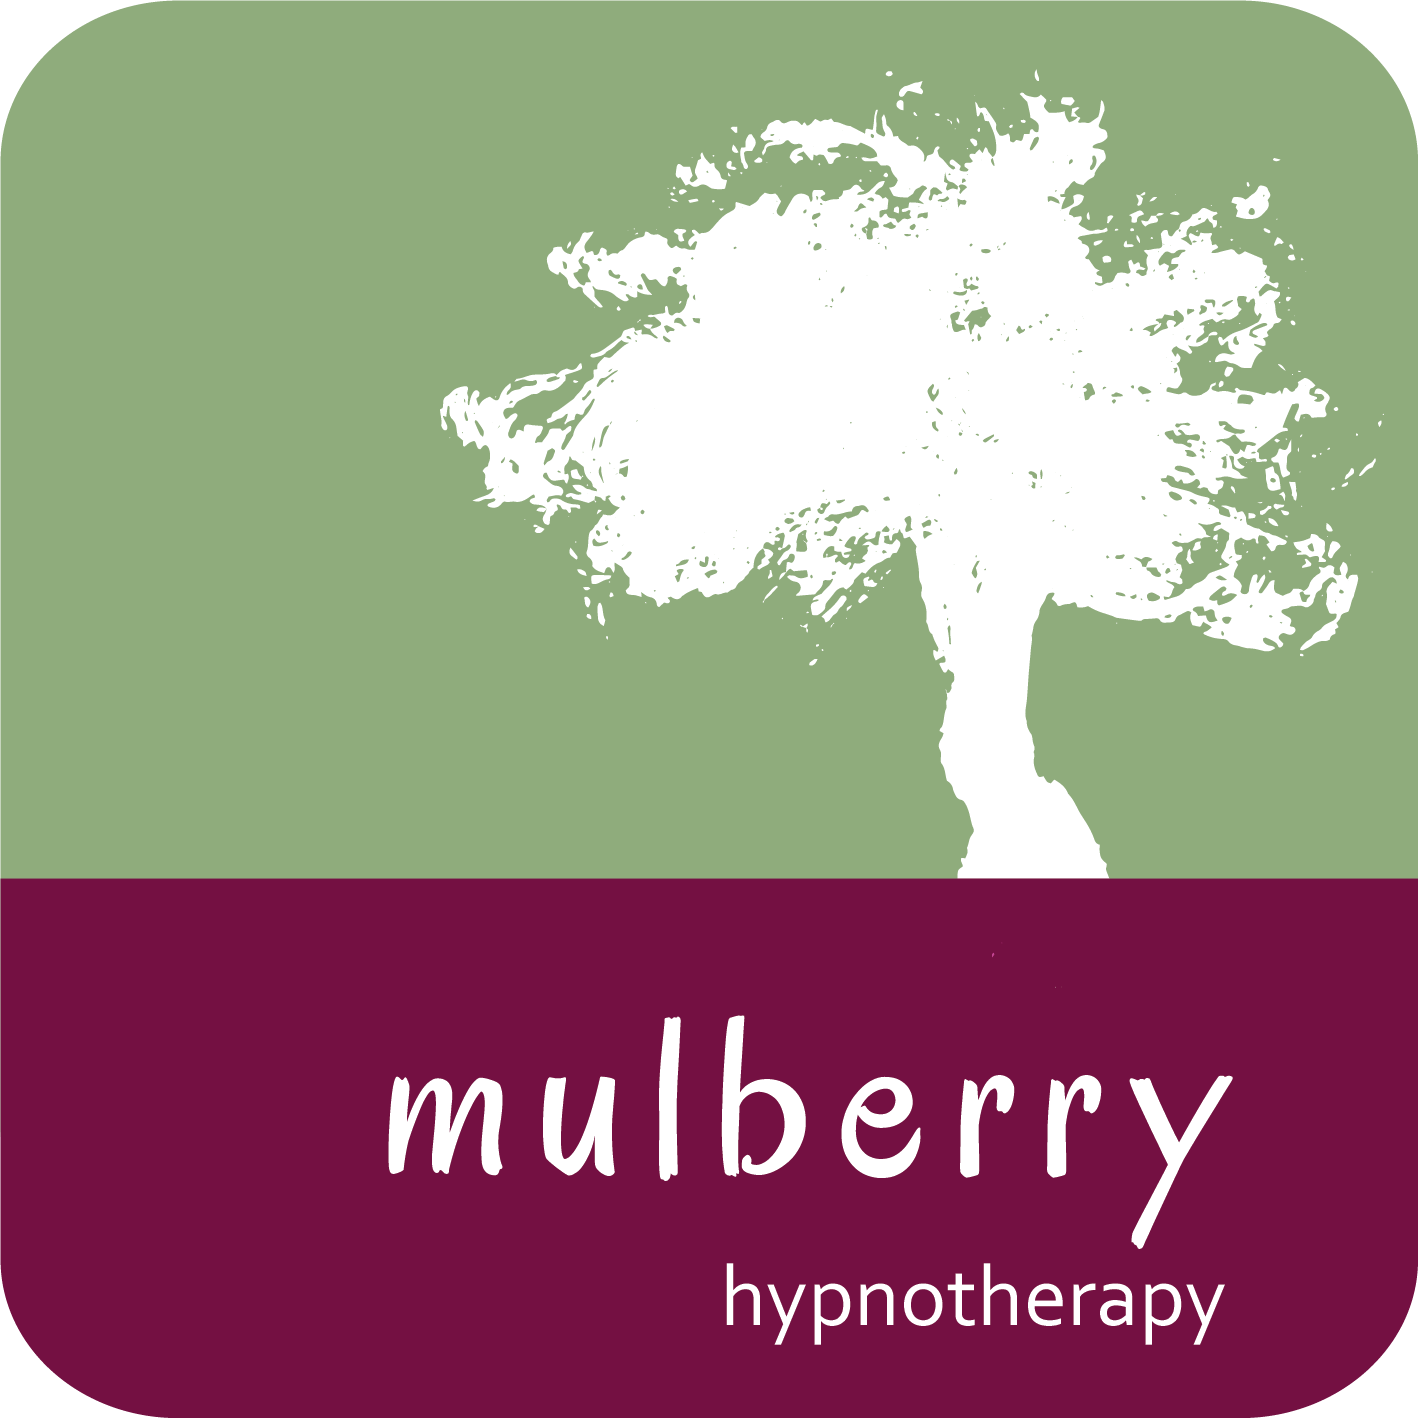 Mulberry Hypnotherapy Practice Nantwich